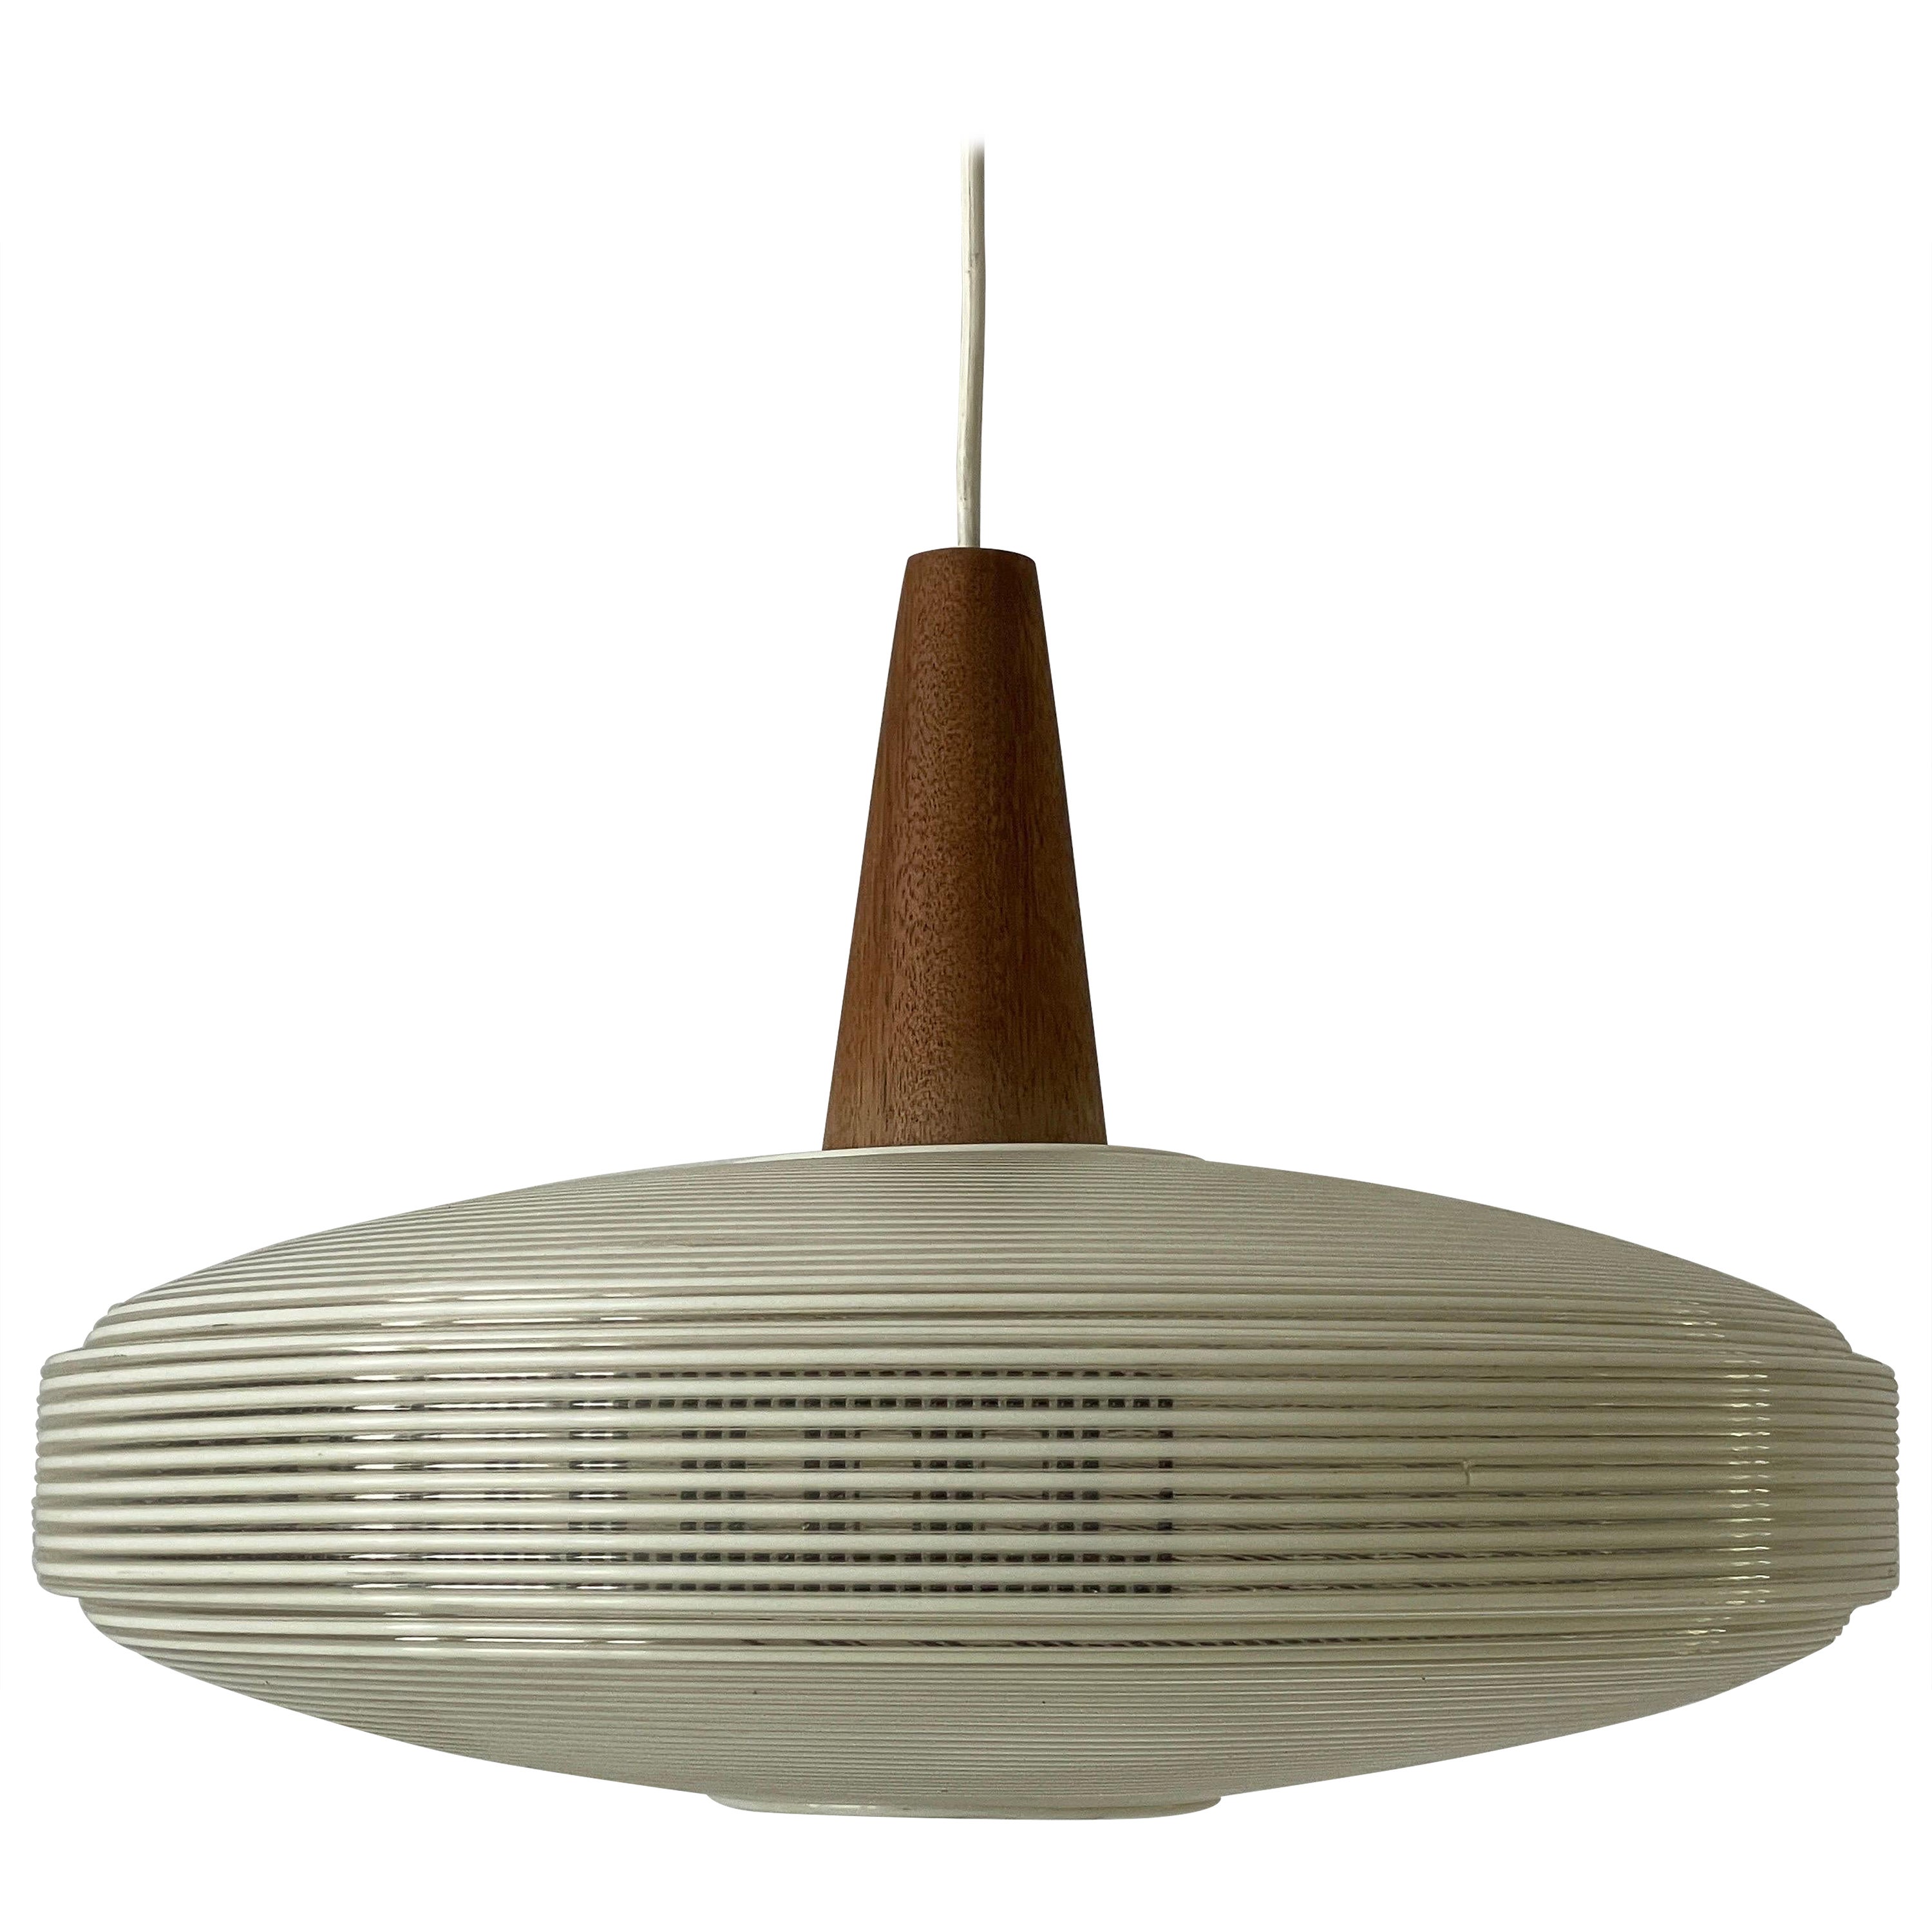 Rare Rotaflex Ceiling Lamp by Yasha Heifetz with Teak Detail, 1960s Germany For Sale